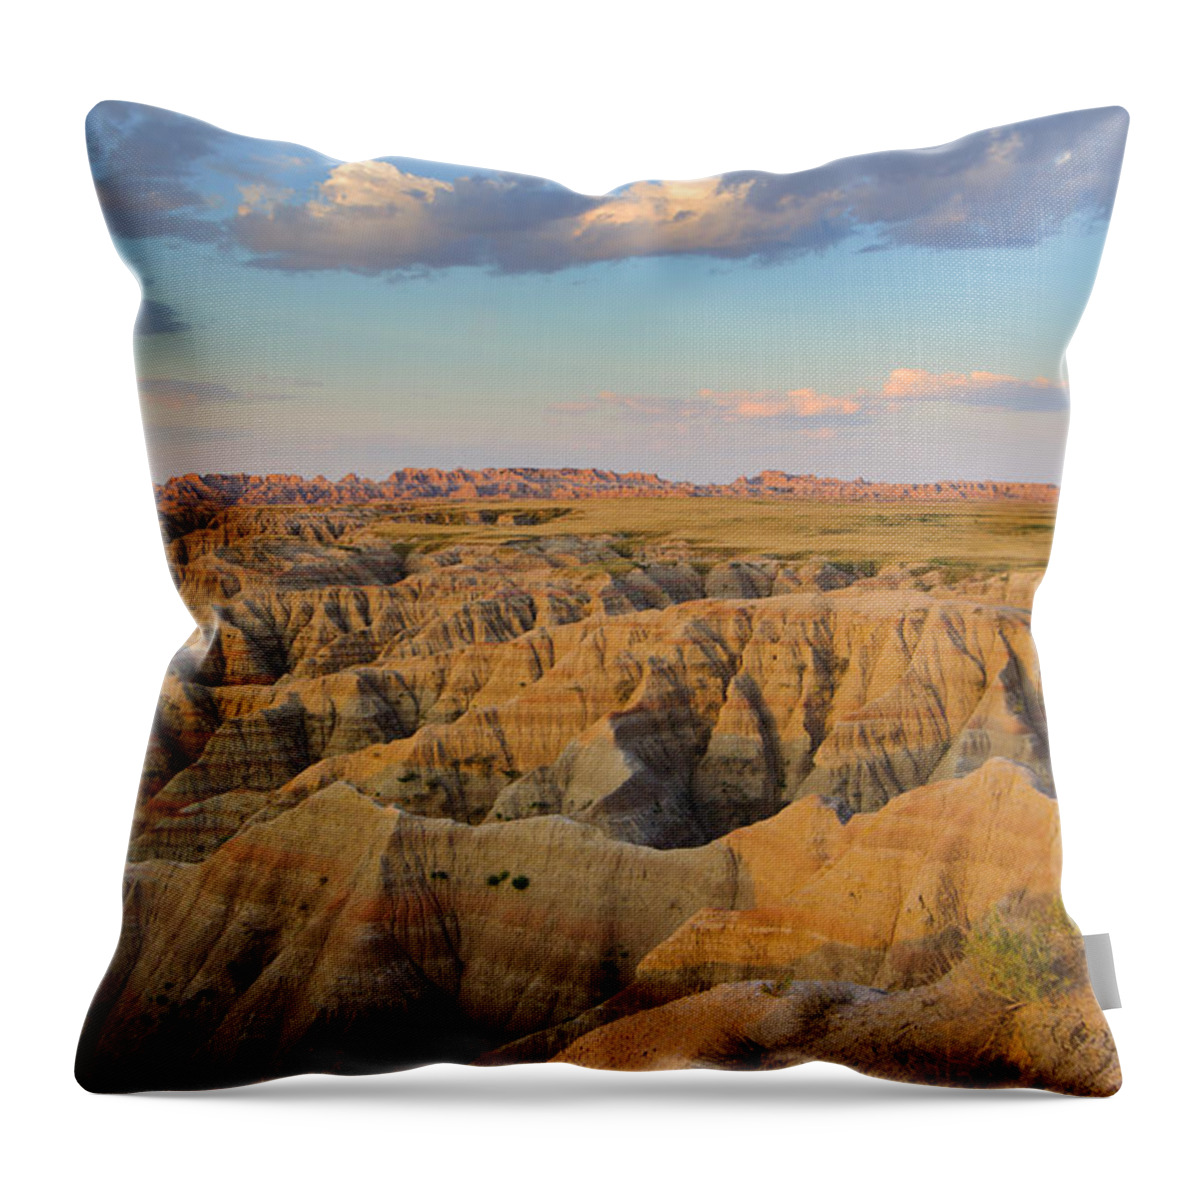 Badlands Throw Pillow featuring the photograph Morning In Badlands by Yinyang